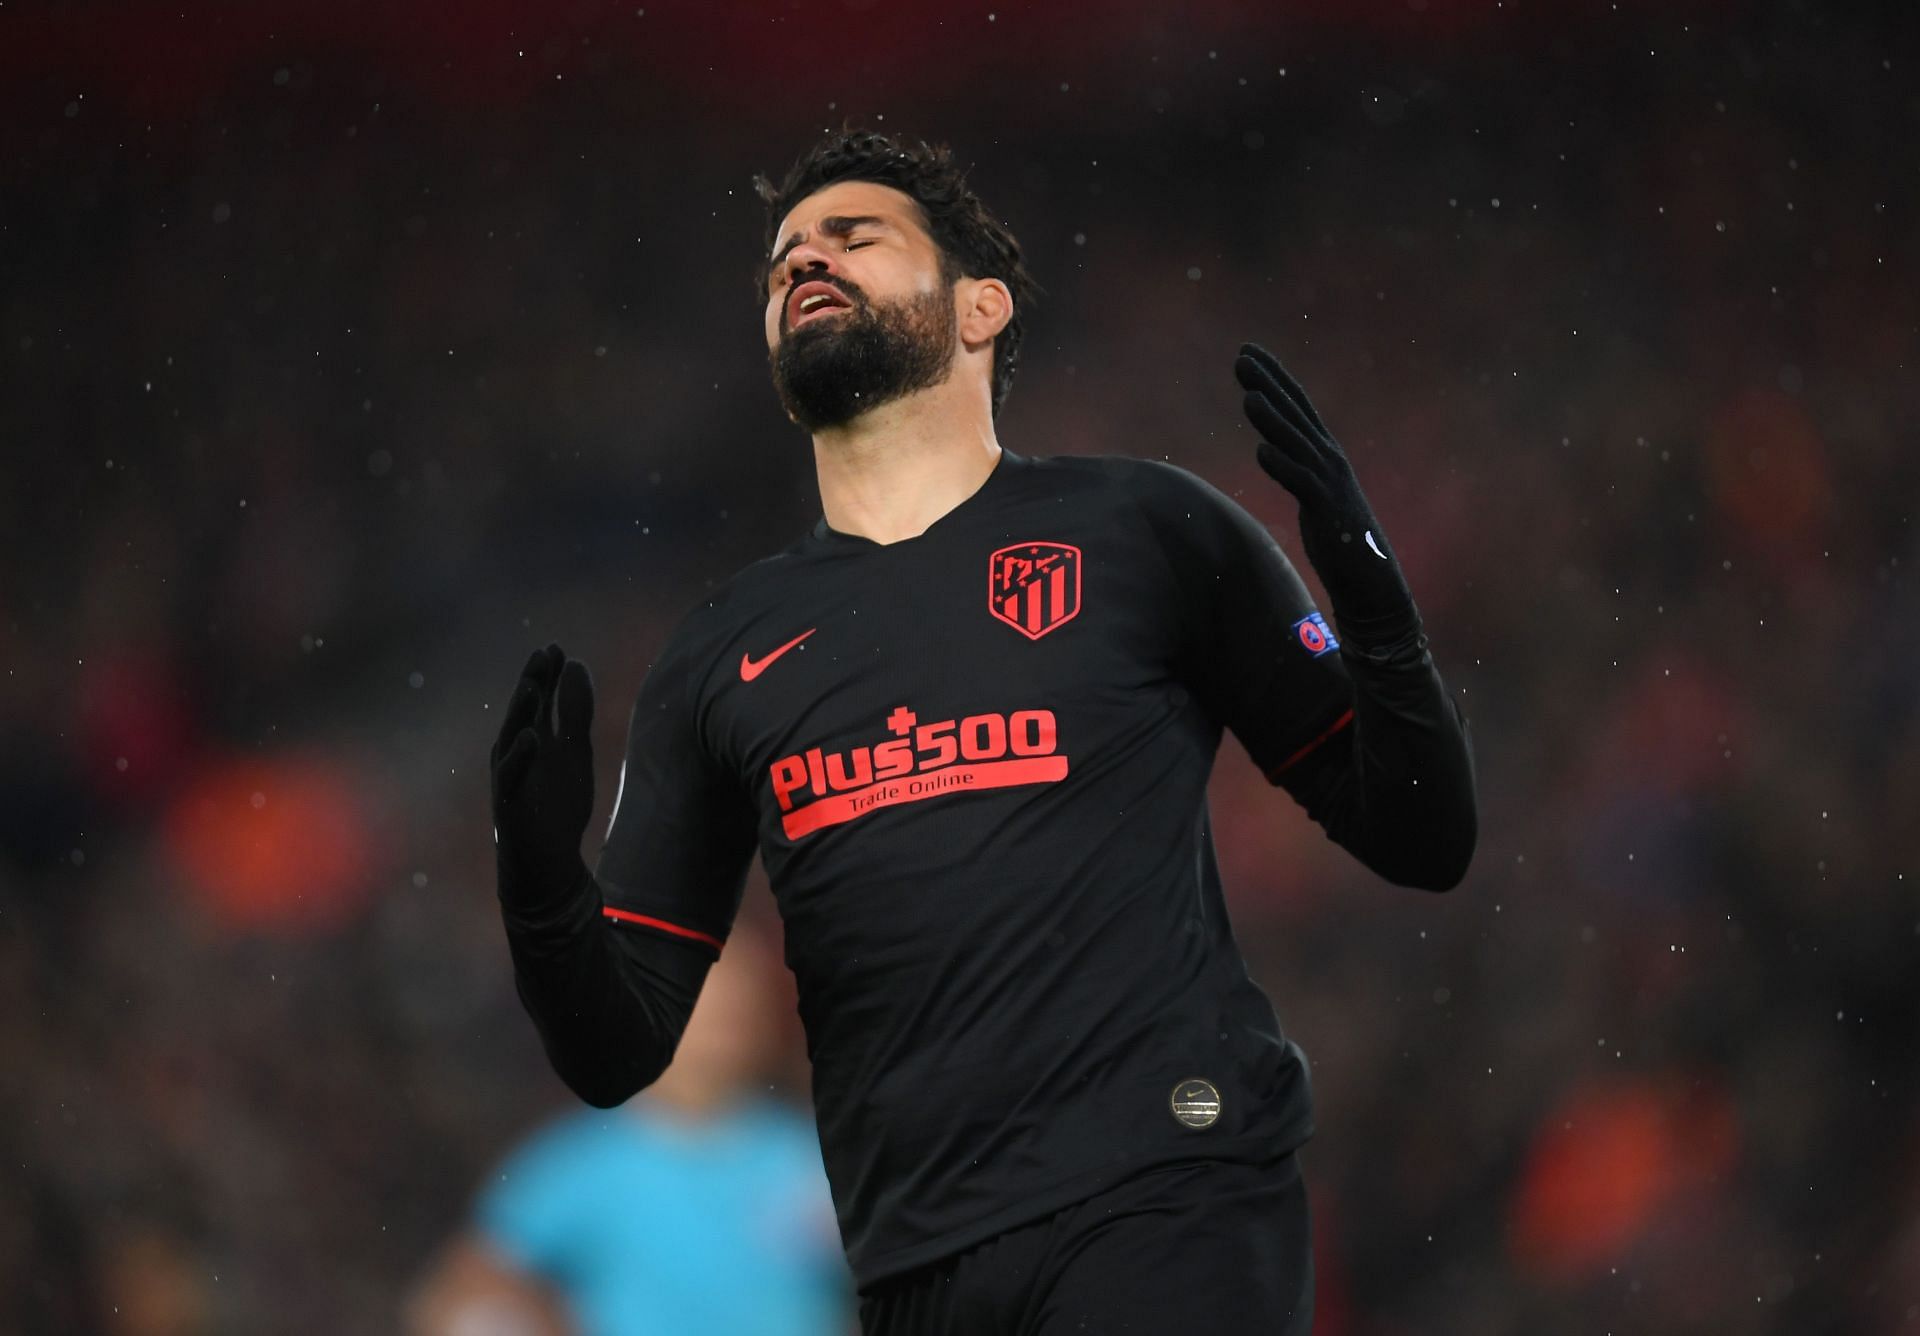 Costa returned to Atletico Madrid in January 2017